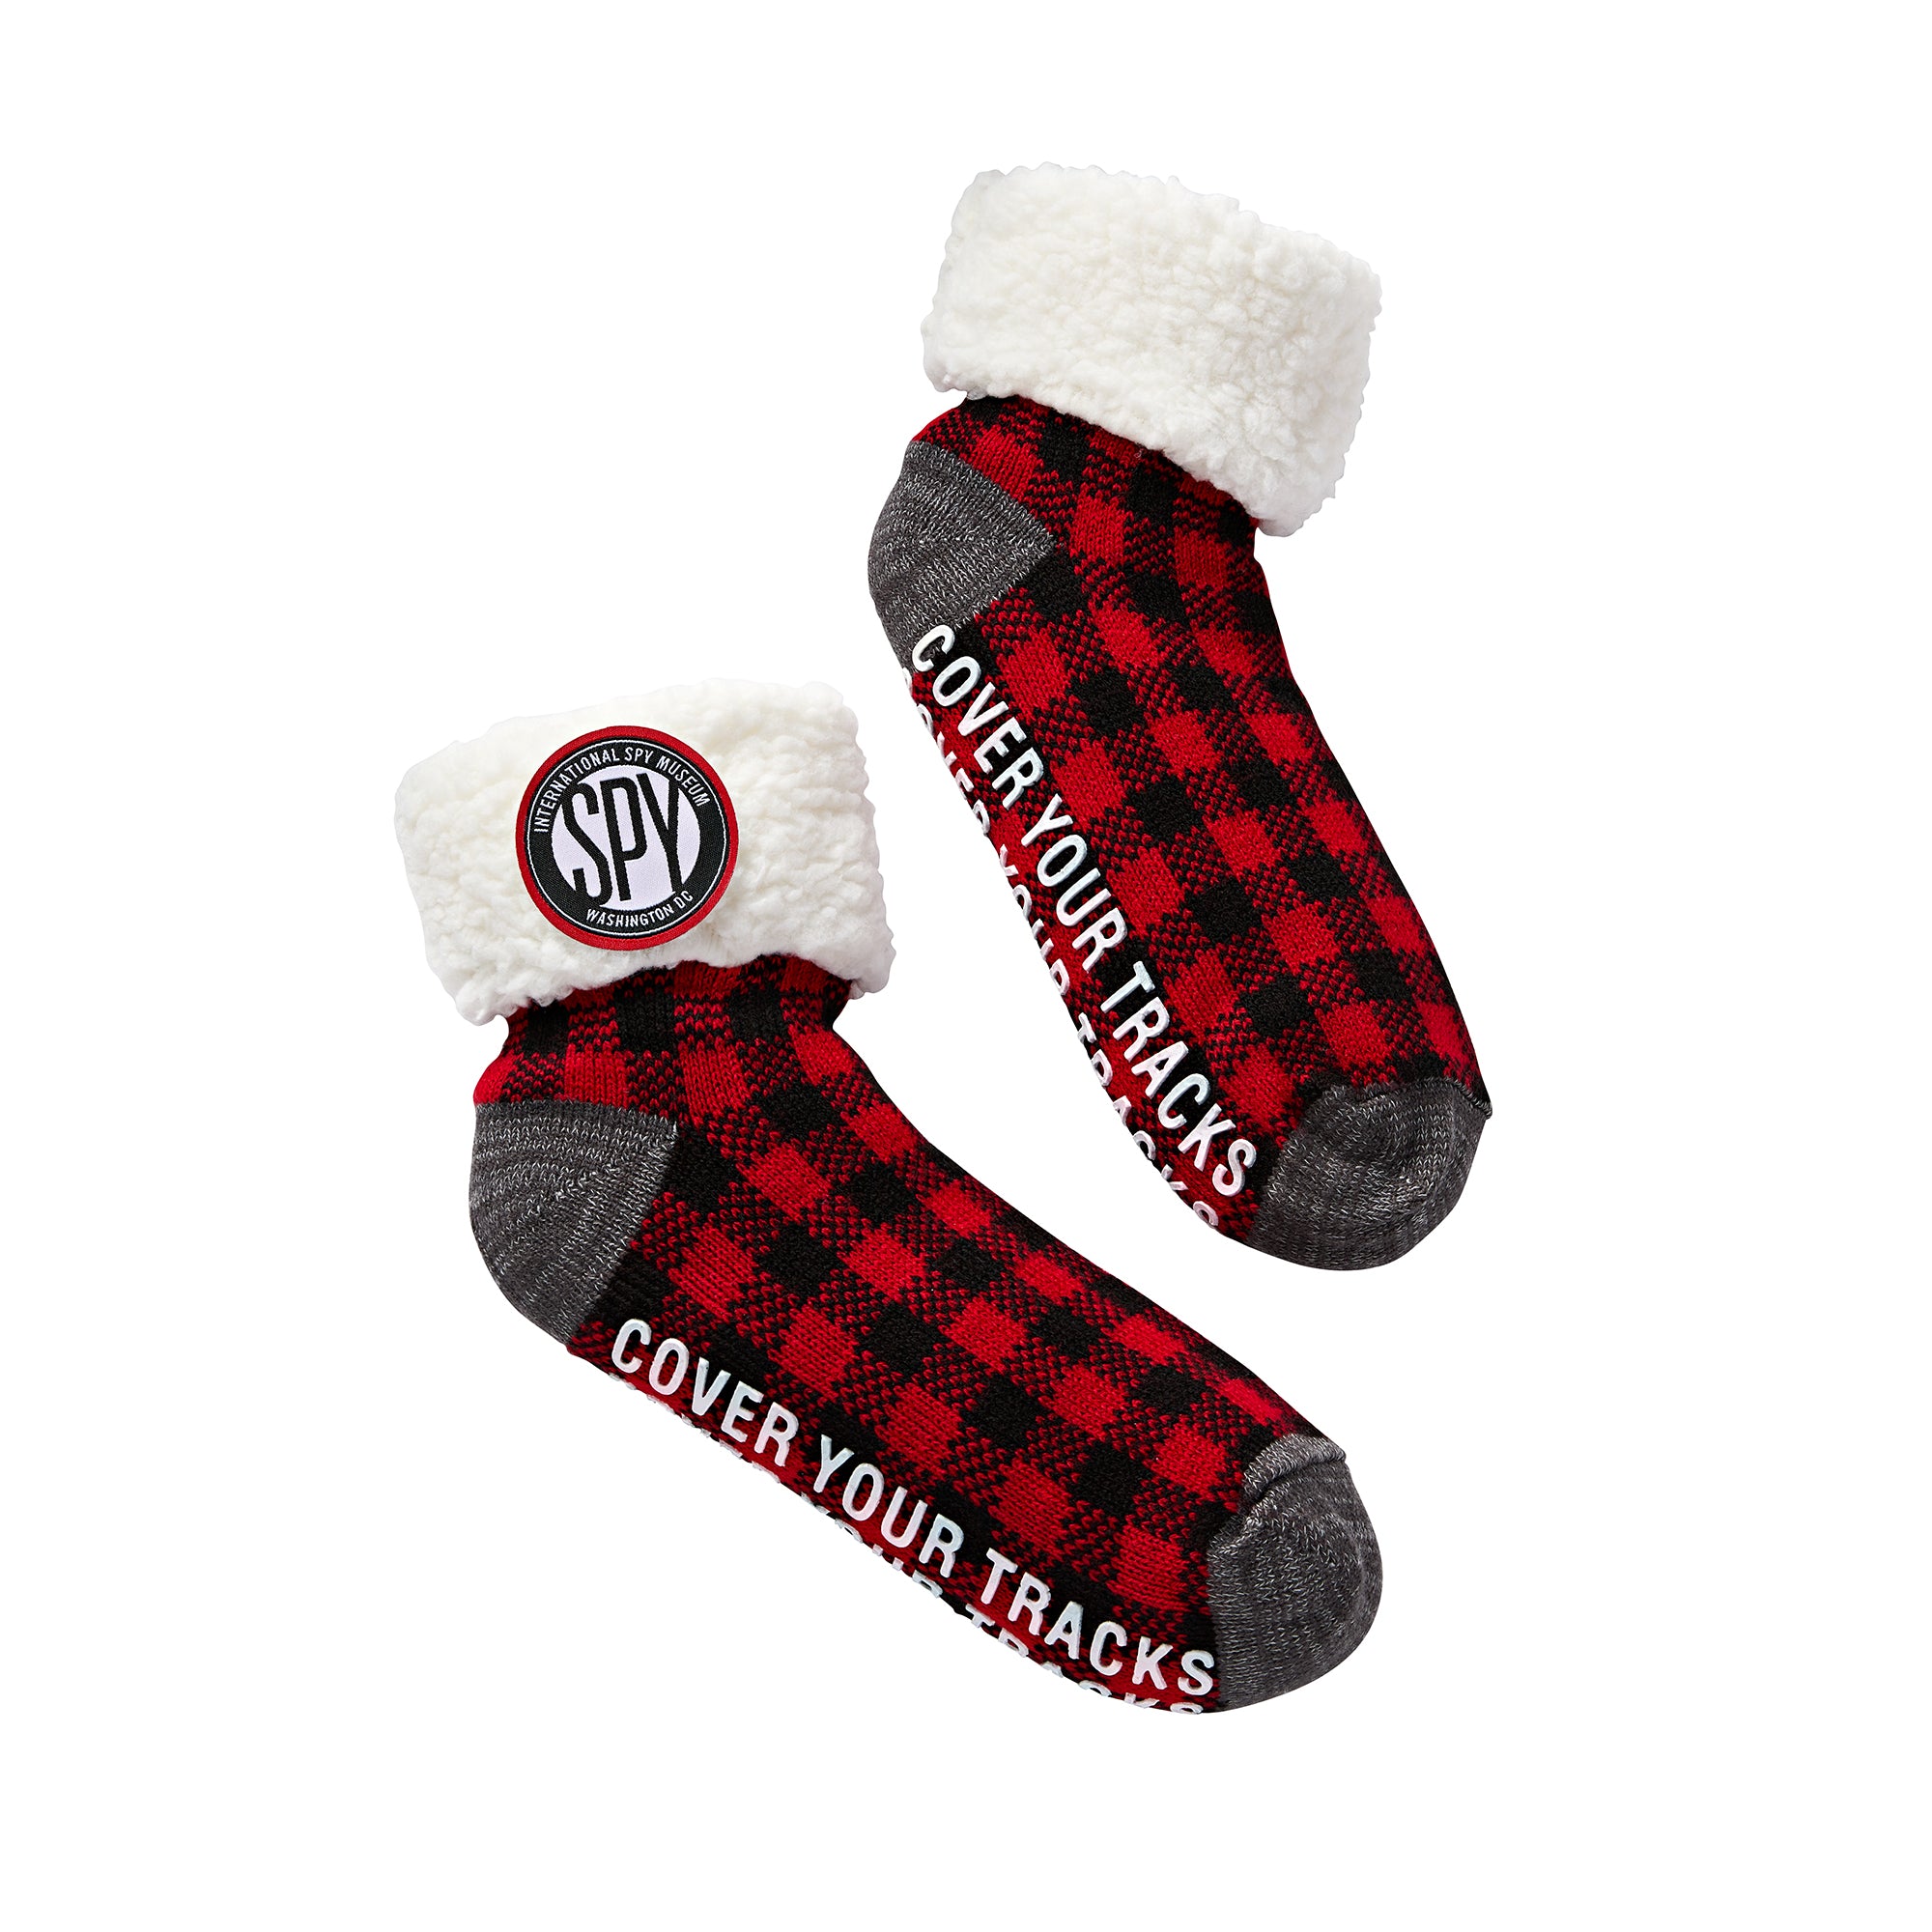 Cover Your Tracks Adult Grip Sherpa Socks